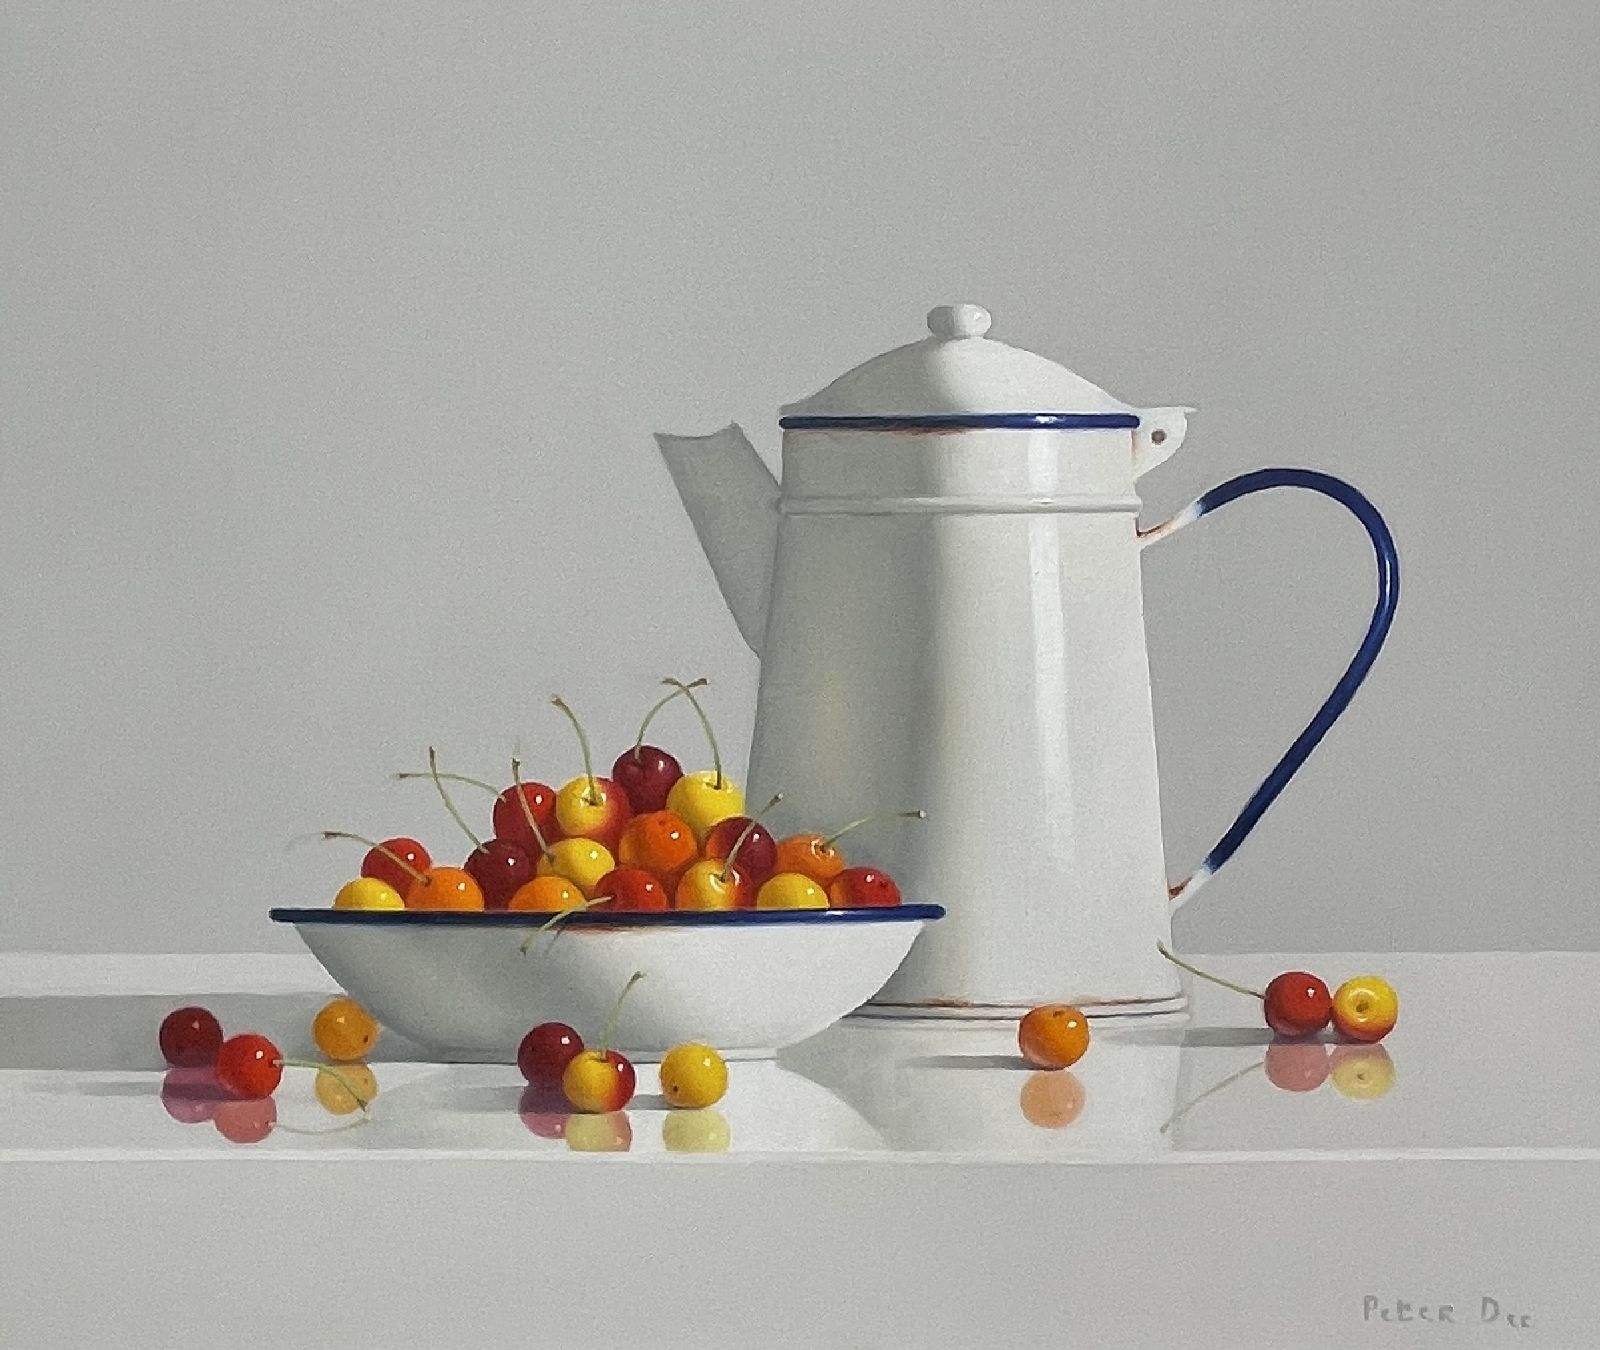 White Vintage Enamelware Coffee Pot and Bowl with Rainier Cherries by Peter Dee